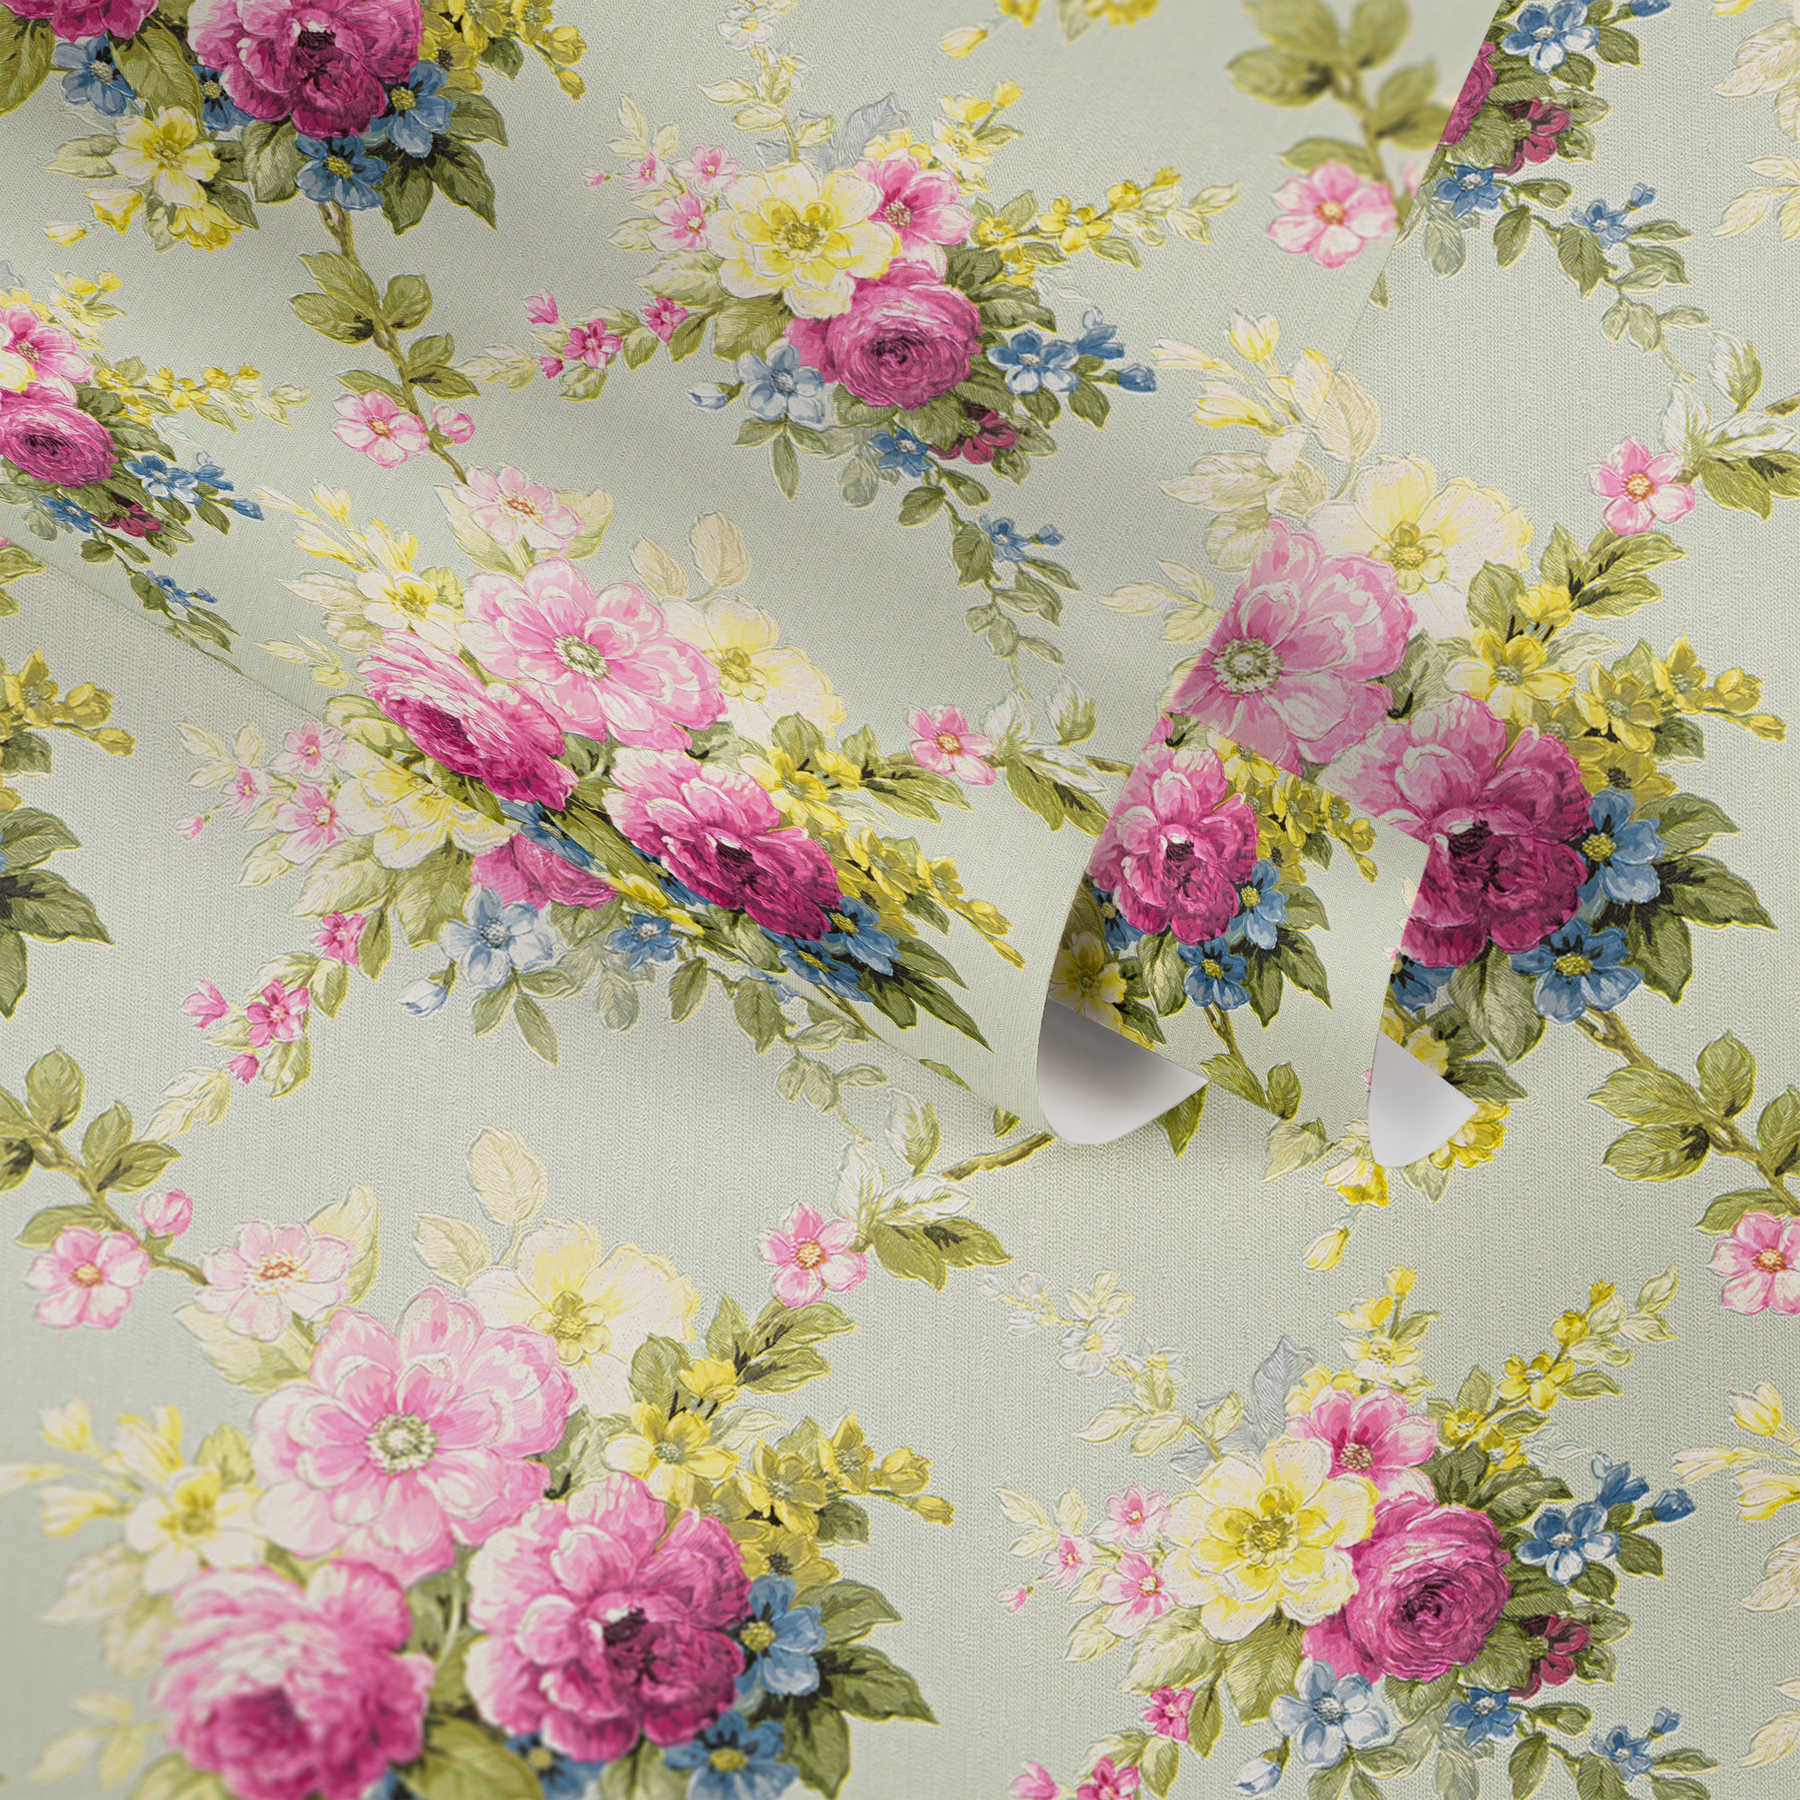             Flowers wallpaper peonies in vintage style - colourful, green
        